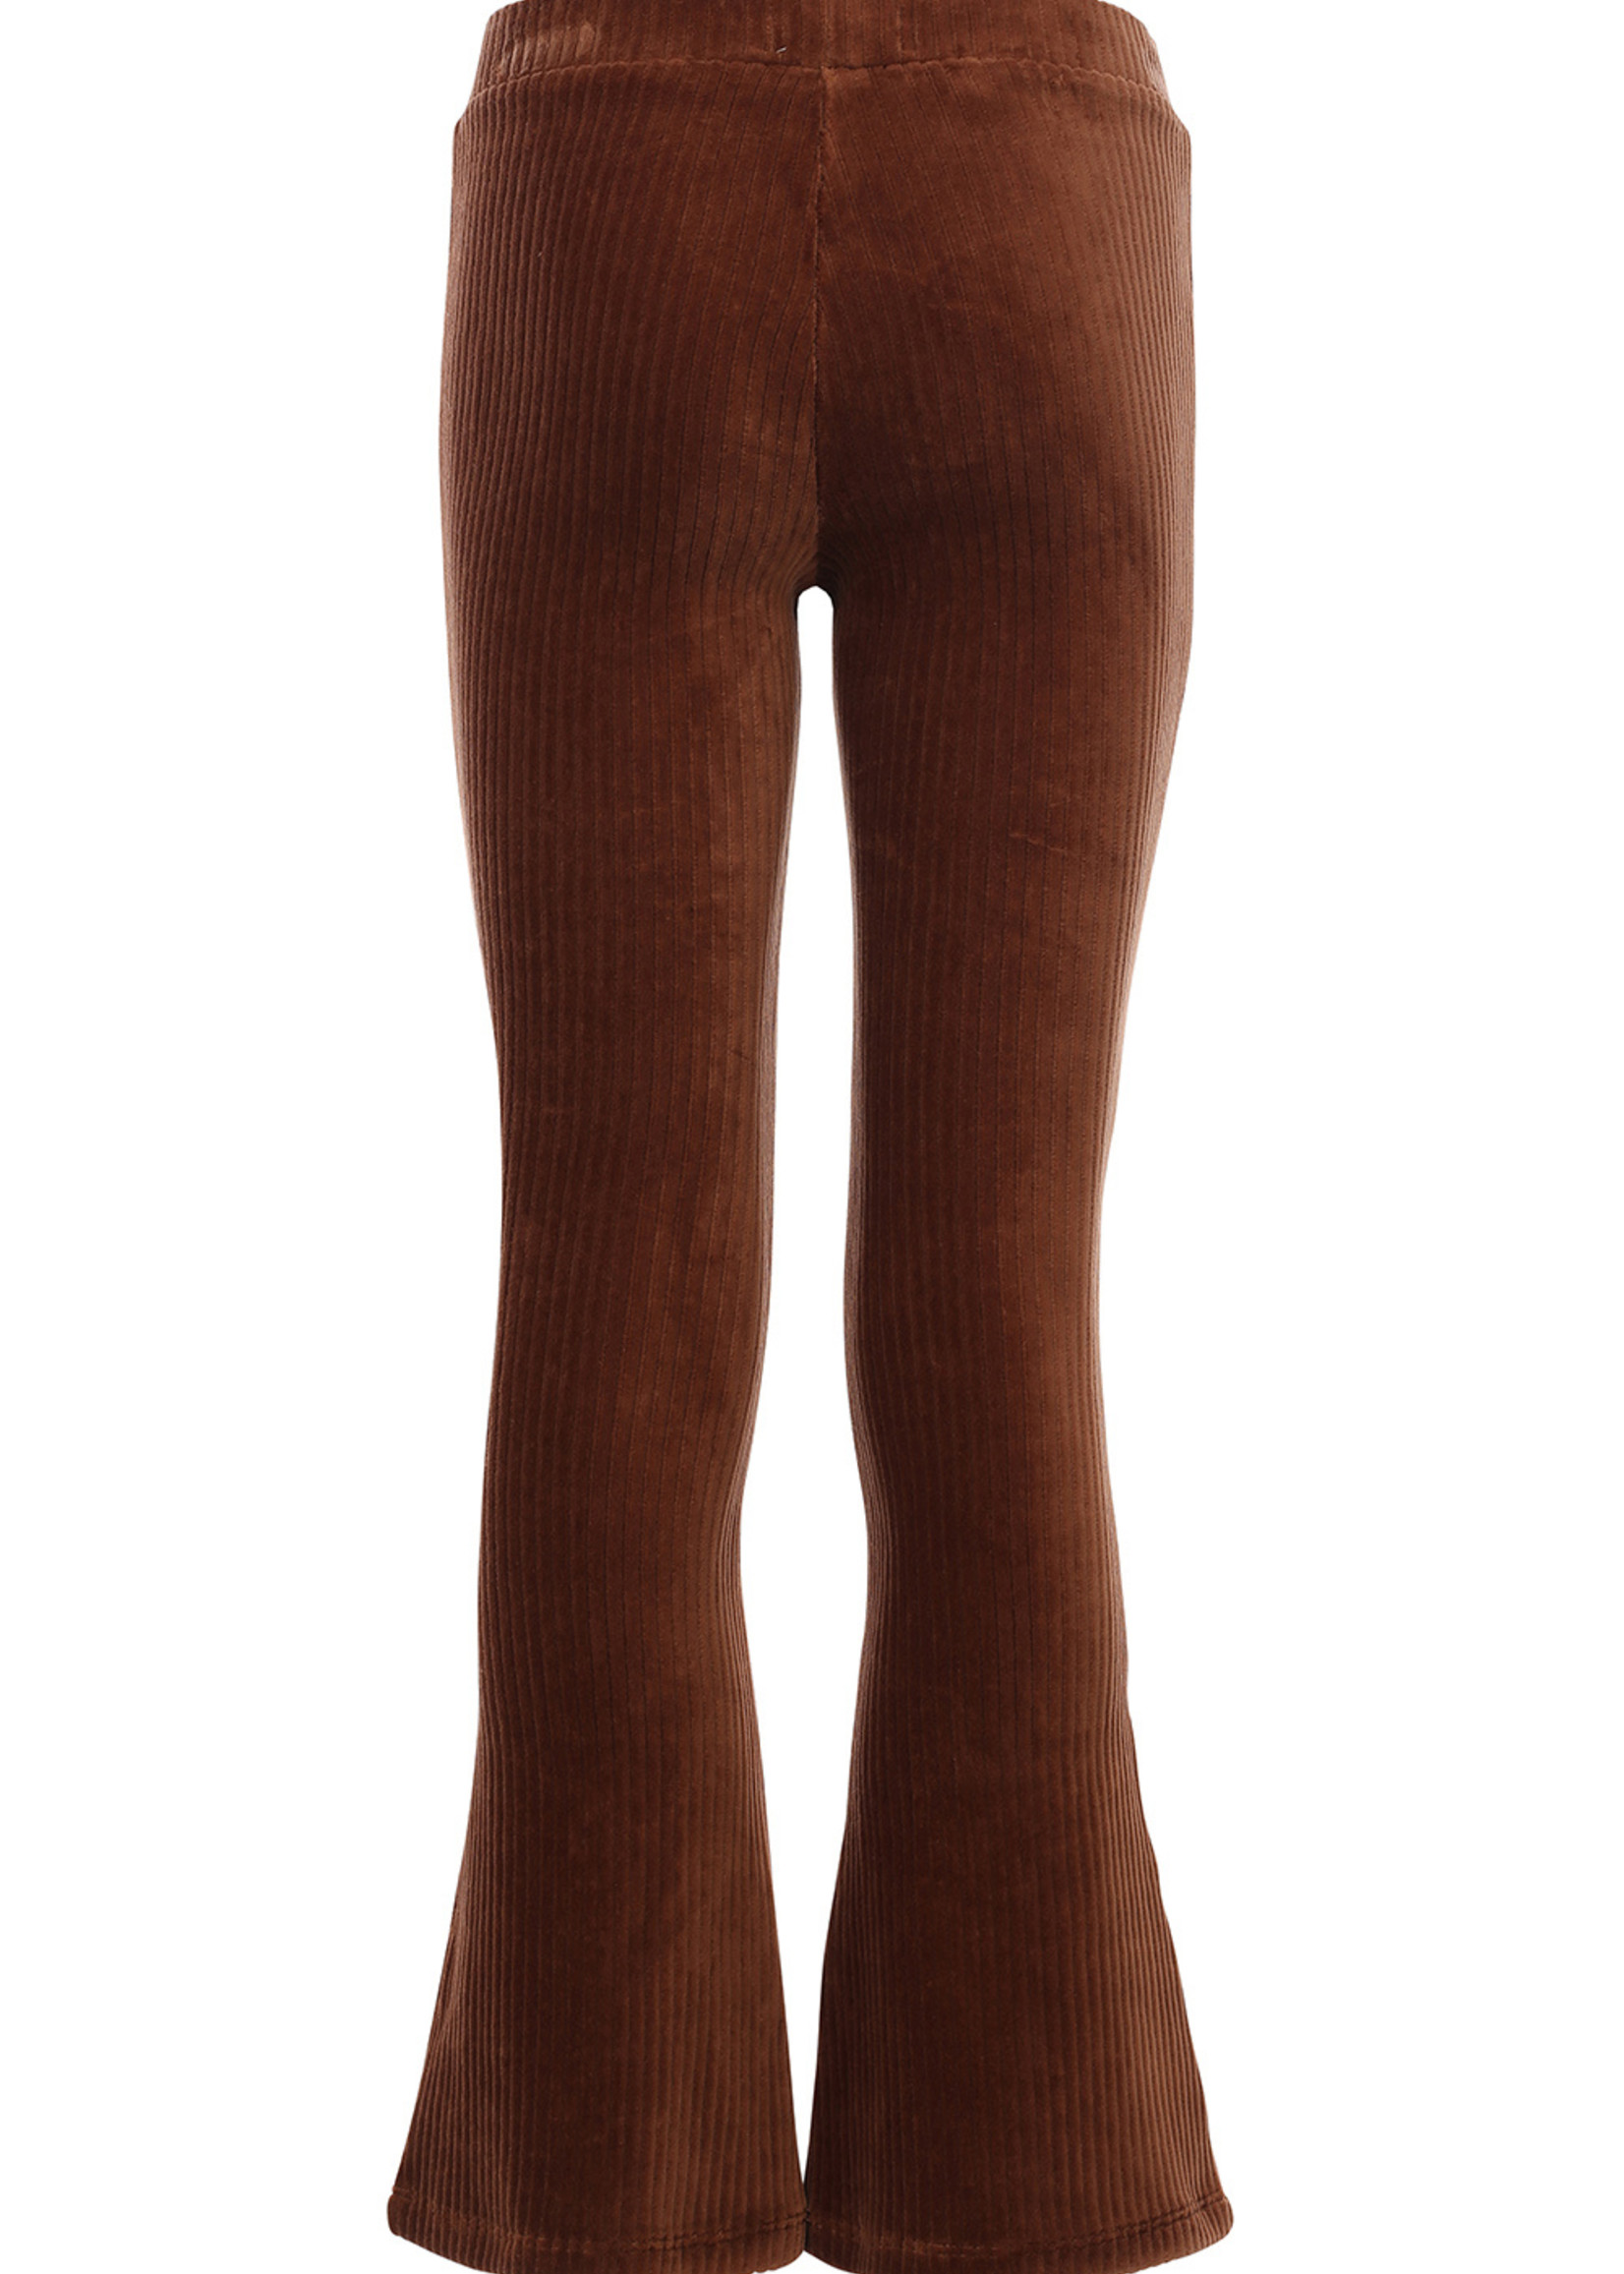 LOOXS Little Little corduroy rib flared pants, Browny